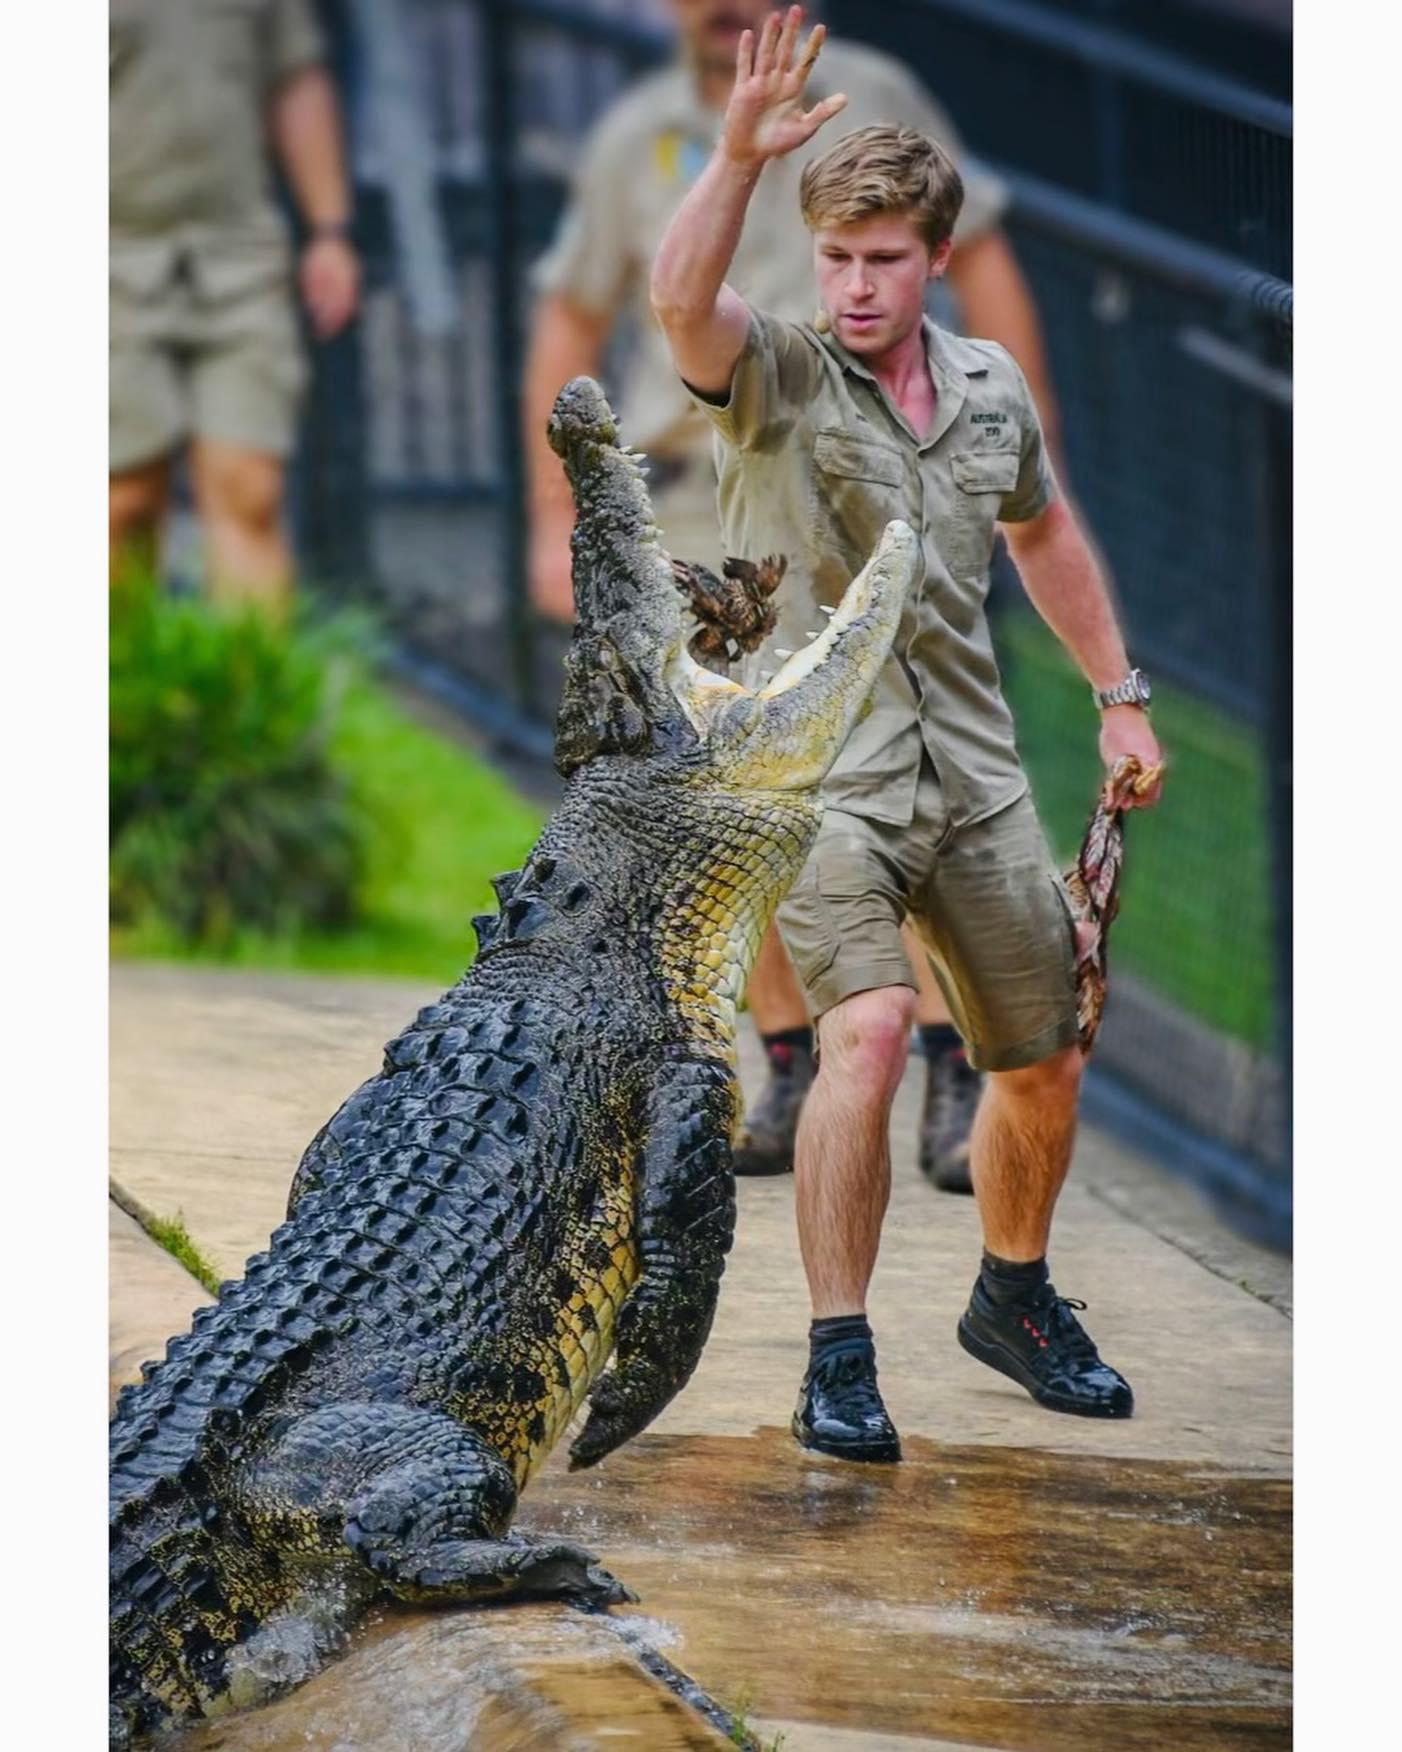 Fans Laud Robert Irwin As 'A Chip Off The Old Block' As He Feeds Daisy The Alligator